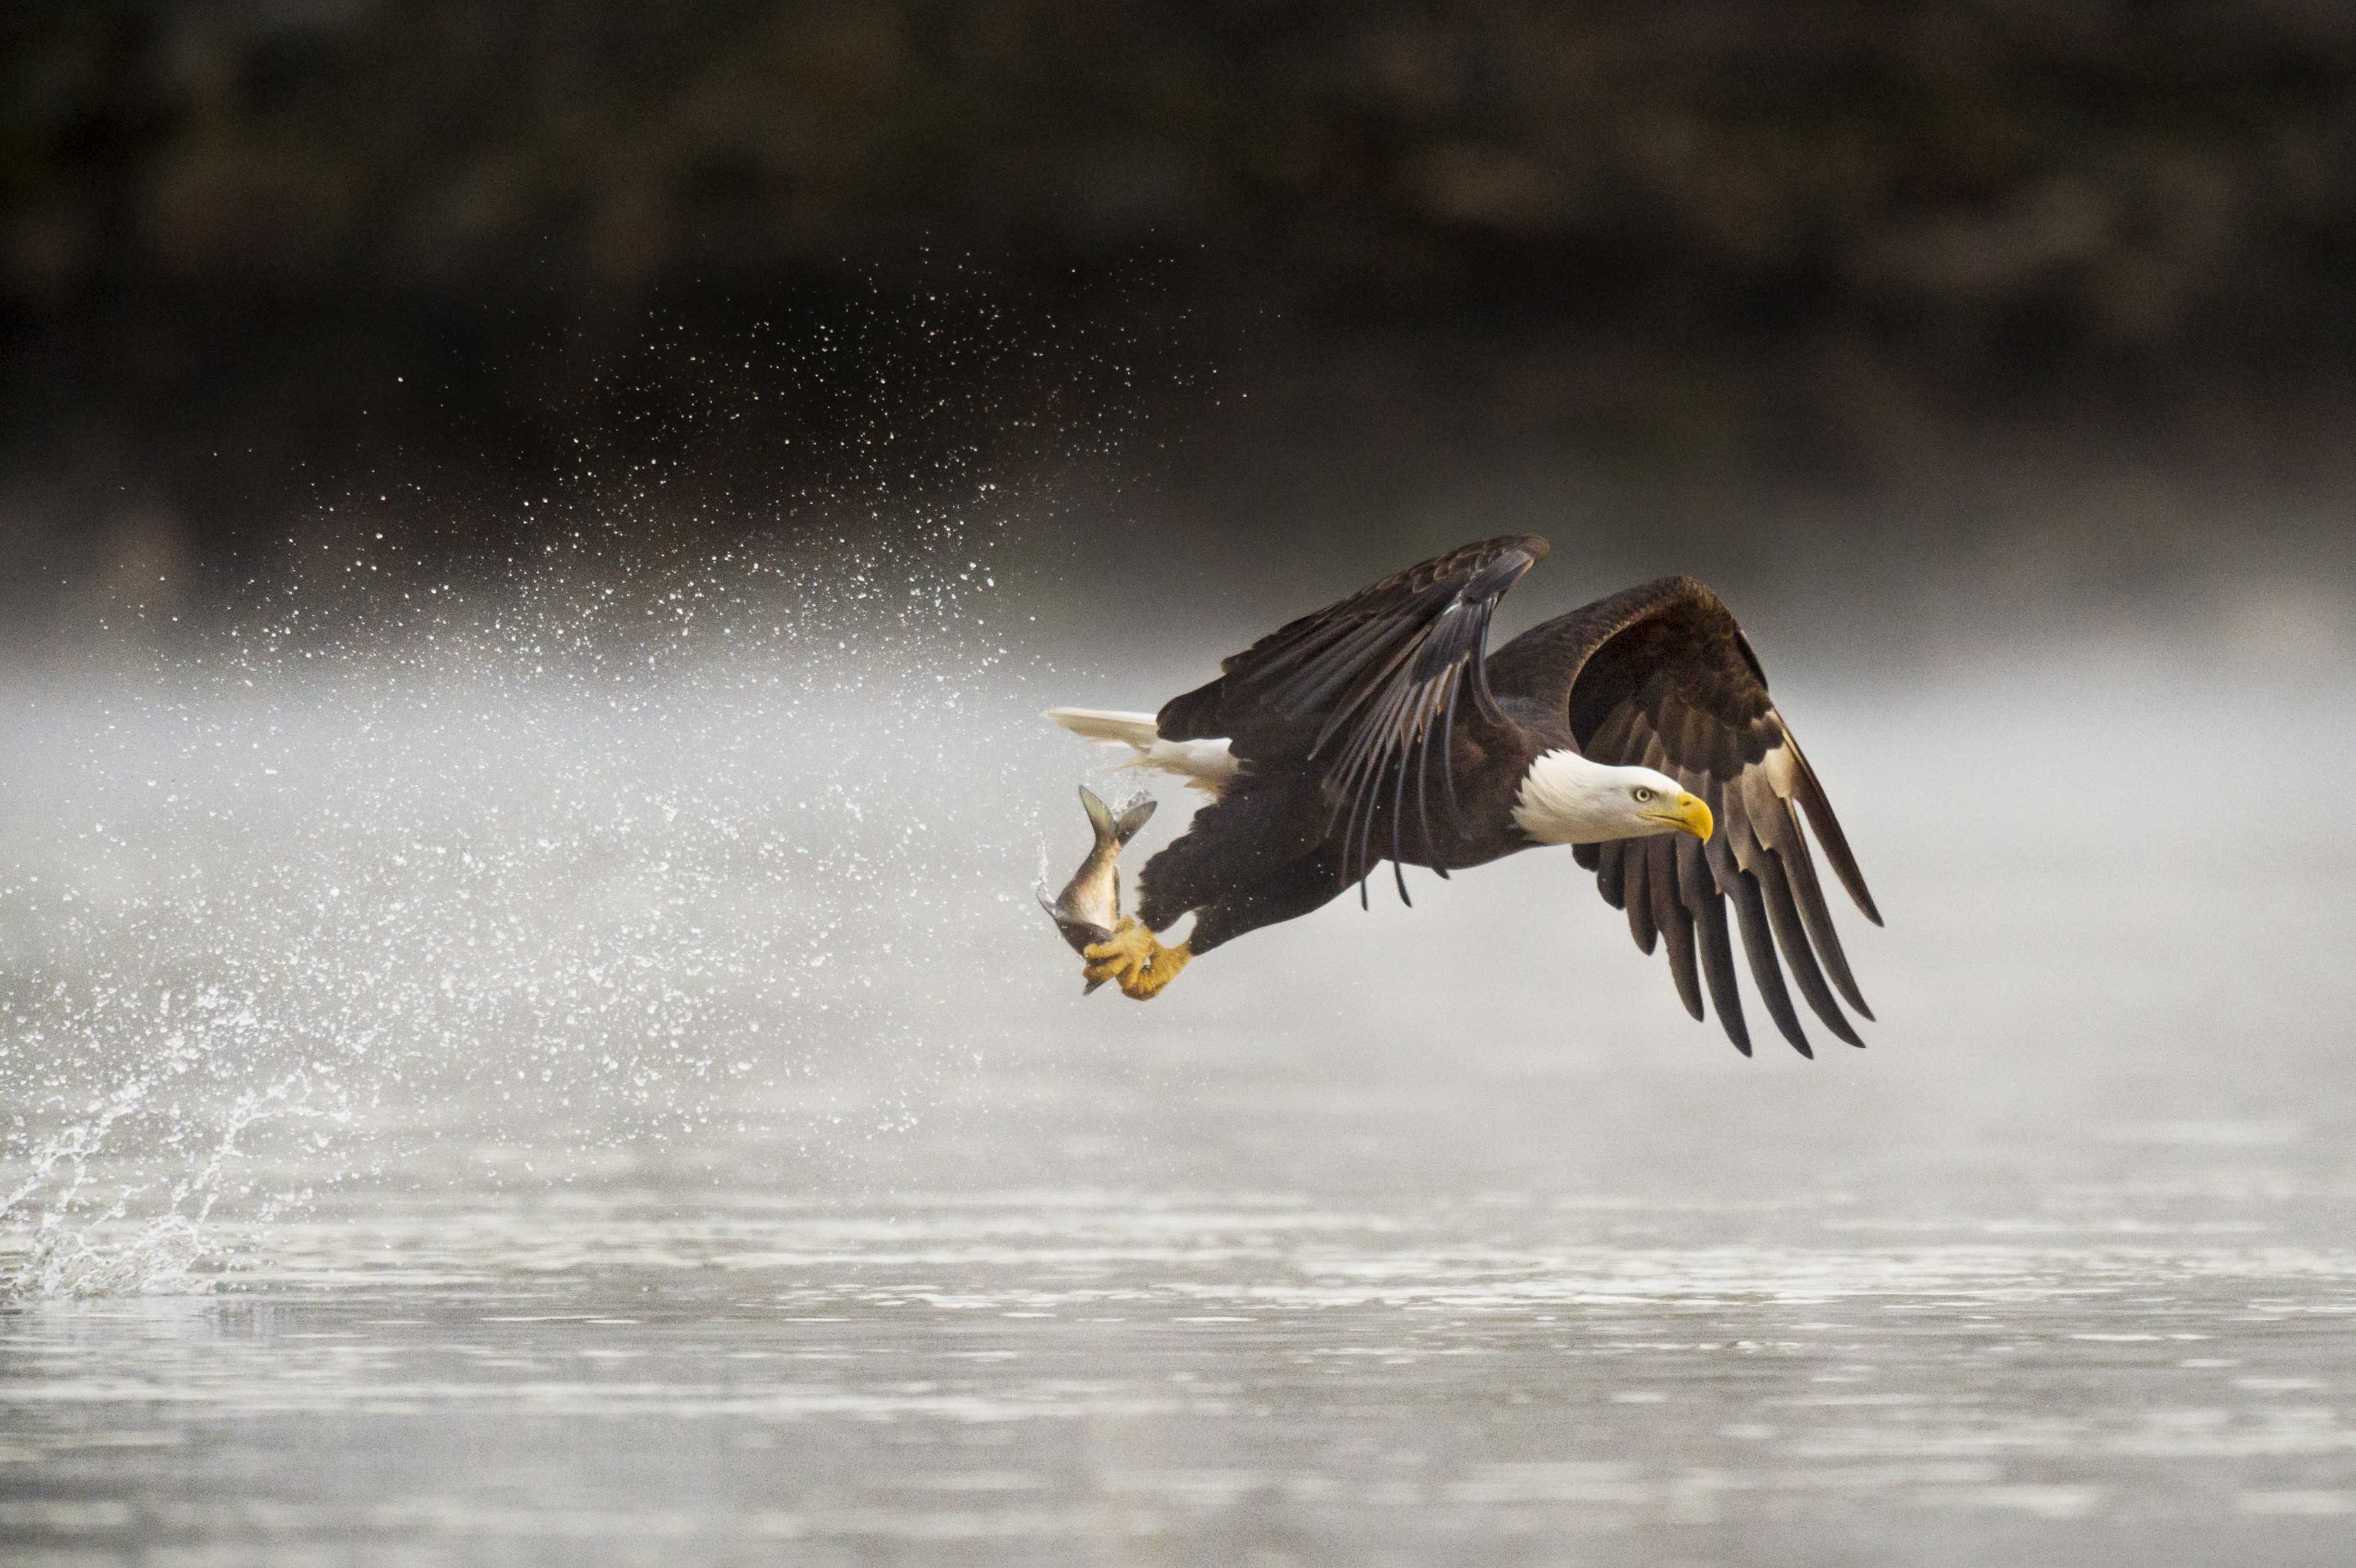 When bald eagles go fishing, it's quite a catch